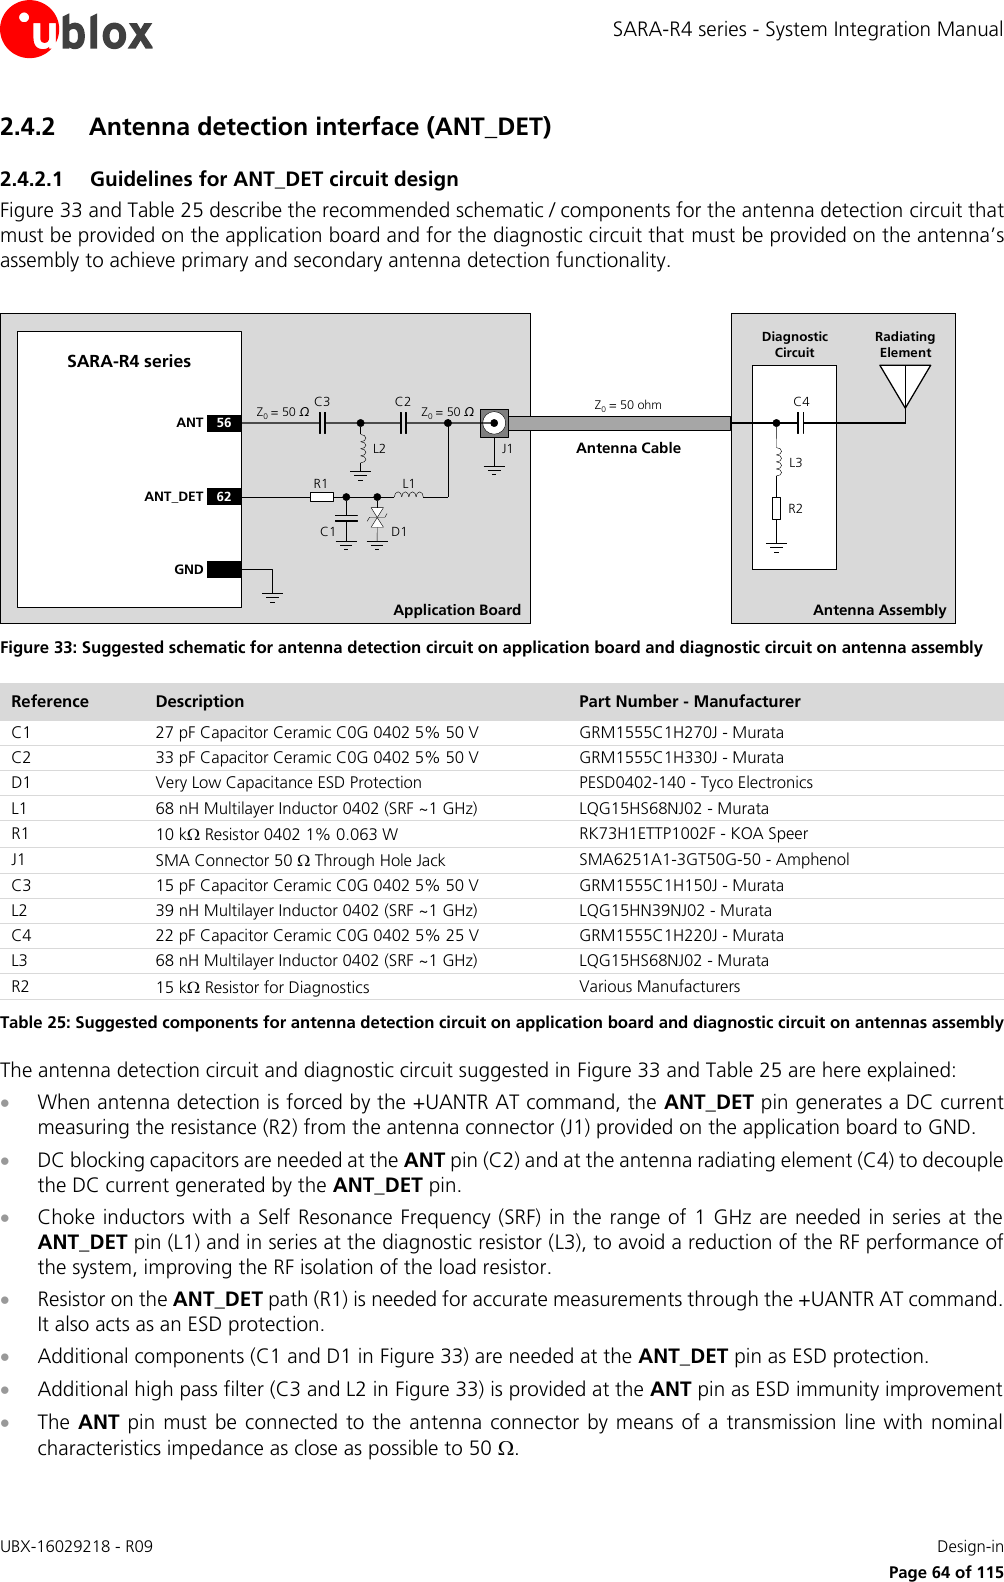 SARA-R4 series - System Integration Manual UBX-16029218 - R09    Design-in     Page 64 of 115 2.4.2 Antenna detection interface (ANT_DET) 2.4.2.1 Guidelines for ANT_DET circuit design Figure 33 and Table 25 describe the recommended schematic / components for the antenna detection circuit that must be provided on the application board and for the diagnostic circuit that must be provided on the antenna’s assembly to achieve primary and secondary antenna detection functionality.  Application BoardAntenna CableSARA-R4 series56ANT62ANT_DETR1C1 D1L1C2J1Z0= 50 ΩZ0= 50 ΩZ0= 50 ohmAntenna AssemblyR2C4L3Radiating ElementDiagnostic CircuitGNDL2C3 Figure 33: Suggested schematic for antenna detection circuit on application board and diagnostic circuit on antenna assembly Reference Description Part Number - Manufacturer C1 27 pF Capacitor Ceramic C0G 0402 5% 50 V GRM1555C1H270J - Murata C2 33 pF Capacitor Ceramic C0G 0402 5% 50 V GRM1555C1H330J - Murata D1 Very Low Capacitance ESD Protection PESD0402-140 - Tyco Electronics L1 68 nH Multilayer Inductor 0402 (SRF ~1 GHz) LQG15HS68NJ02 - Murata R1 10 k Resistor 0402 1% 0.063 W RK73H1ETTP1002F - KOA Speer J1 SMA Connector 50  Through Hole Jack SMA6251A1-3GT50G-50 - Amphenol C3 15 pF Capacitor Ceramic C0G 0402 5% 50 V  GRM1555C1H150J - Murata L2 39 nH Multilayer Inductor 0402 (SRF ~1 GHz) LQG15HN39NJ02 - Murata C4 22 pF Capacitor Ceramic C0G 0402 5% 25 V  GRM1555C1H220J - Murata L3 68 nH Multilayer Inductor 0402 (SRF ~1 GHz) LQG15HS68NJ02 - Murata R2 15 k Resistor for Diagnostics Various Manufacturers Table 25: Suggested components for antenna detection circuit on application board and diagnostic circuit on antennas assembly The antenna detection circuit and diagnostic circuit suggested in Figure 33 and Table 25 are here explained:  When antenna detection is forced by the +UANTR AT command, the ANT_DET pin generates a DC current measuring the resistance (R2) from the antenna connector (J1) provided on the application board to GND.  DC blocking capacitors are needed at the ANT pin (C2) and at the antenna radiating element (C4) to decouple the DC current generated by the ANT_DET pin.  Choke inductors with a Self Resonance Frequency (SRF) in the range of 1 GHz are needed in series at the ANT_DET pin (L1) and in series at the diagnostic resistor (L3), to avoid a reduction of the RF performance of the system, improving the RF isolation of the load resistor.   Resistor on the ANT_DET path (R1) is needed for accurate measurements through the +UANTR AT command. It also acts as an ESD protection.   Additional components (C1 and D1 in Figure 33) are needed at the ANT_DET pin as ESD protection.  Additional high pass filter (C3 and L2 in Figure 33) is provided at the ANT pin as ESD immunity improvement   The ANT pin must be connected  to the antenna connector by means of a transmission  line with nominal characteristics impedance as close as possible to 50 .  